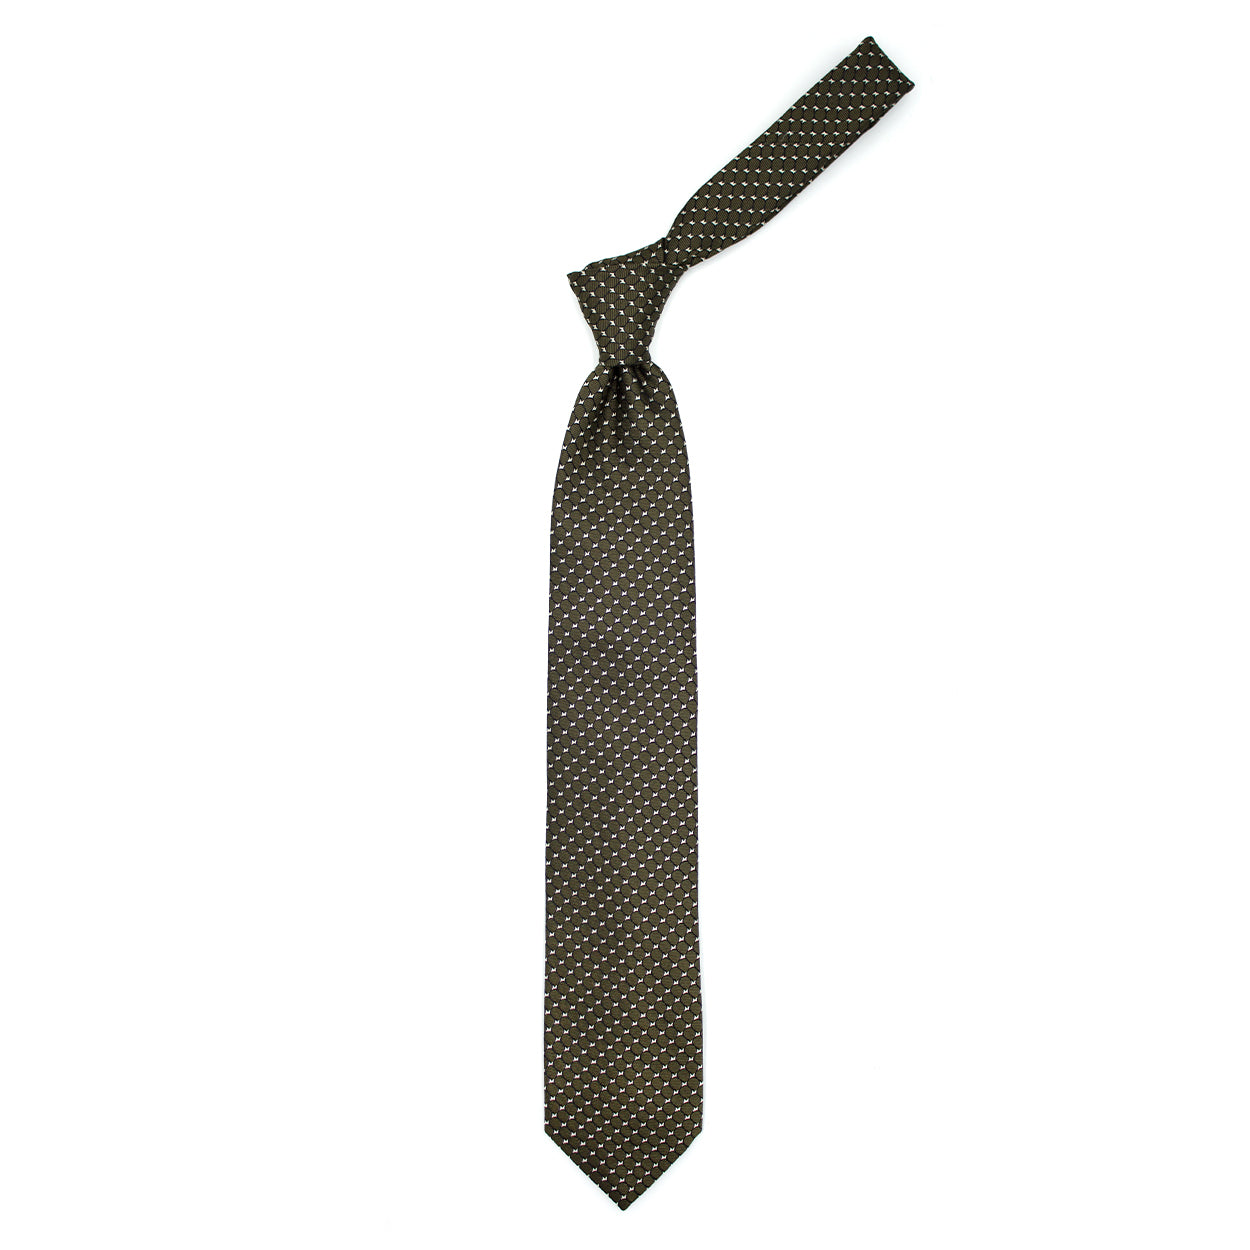 Green tie with blue and white geometric pattern